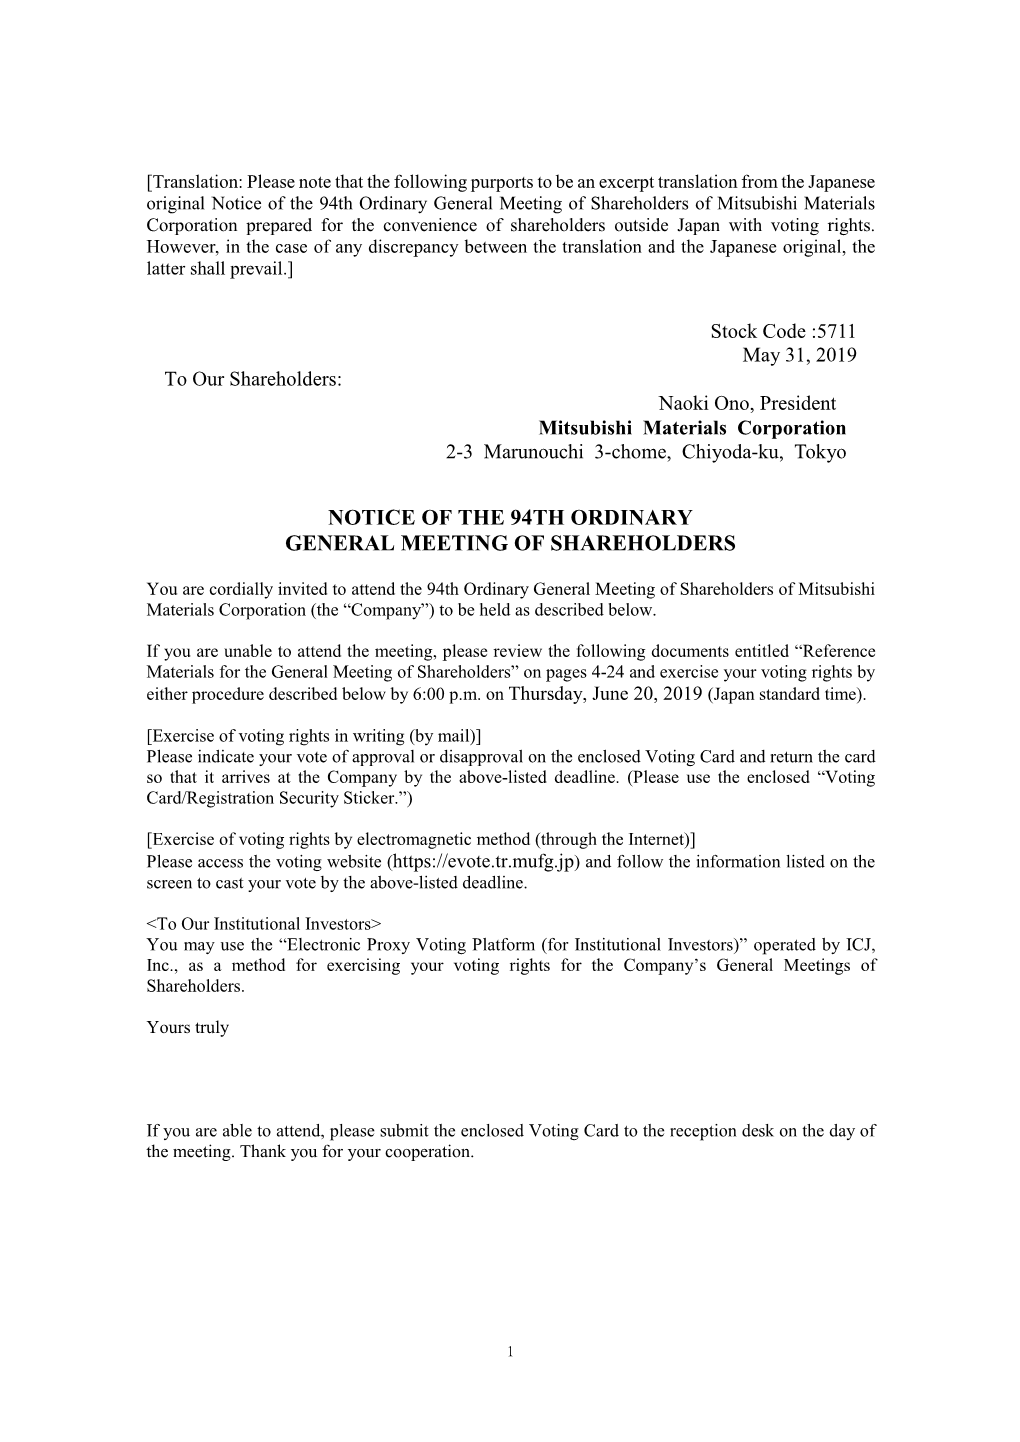 Notice of the 94Th Ordinary General Meeting of Shareholders